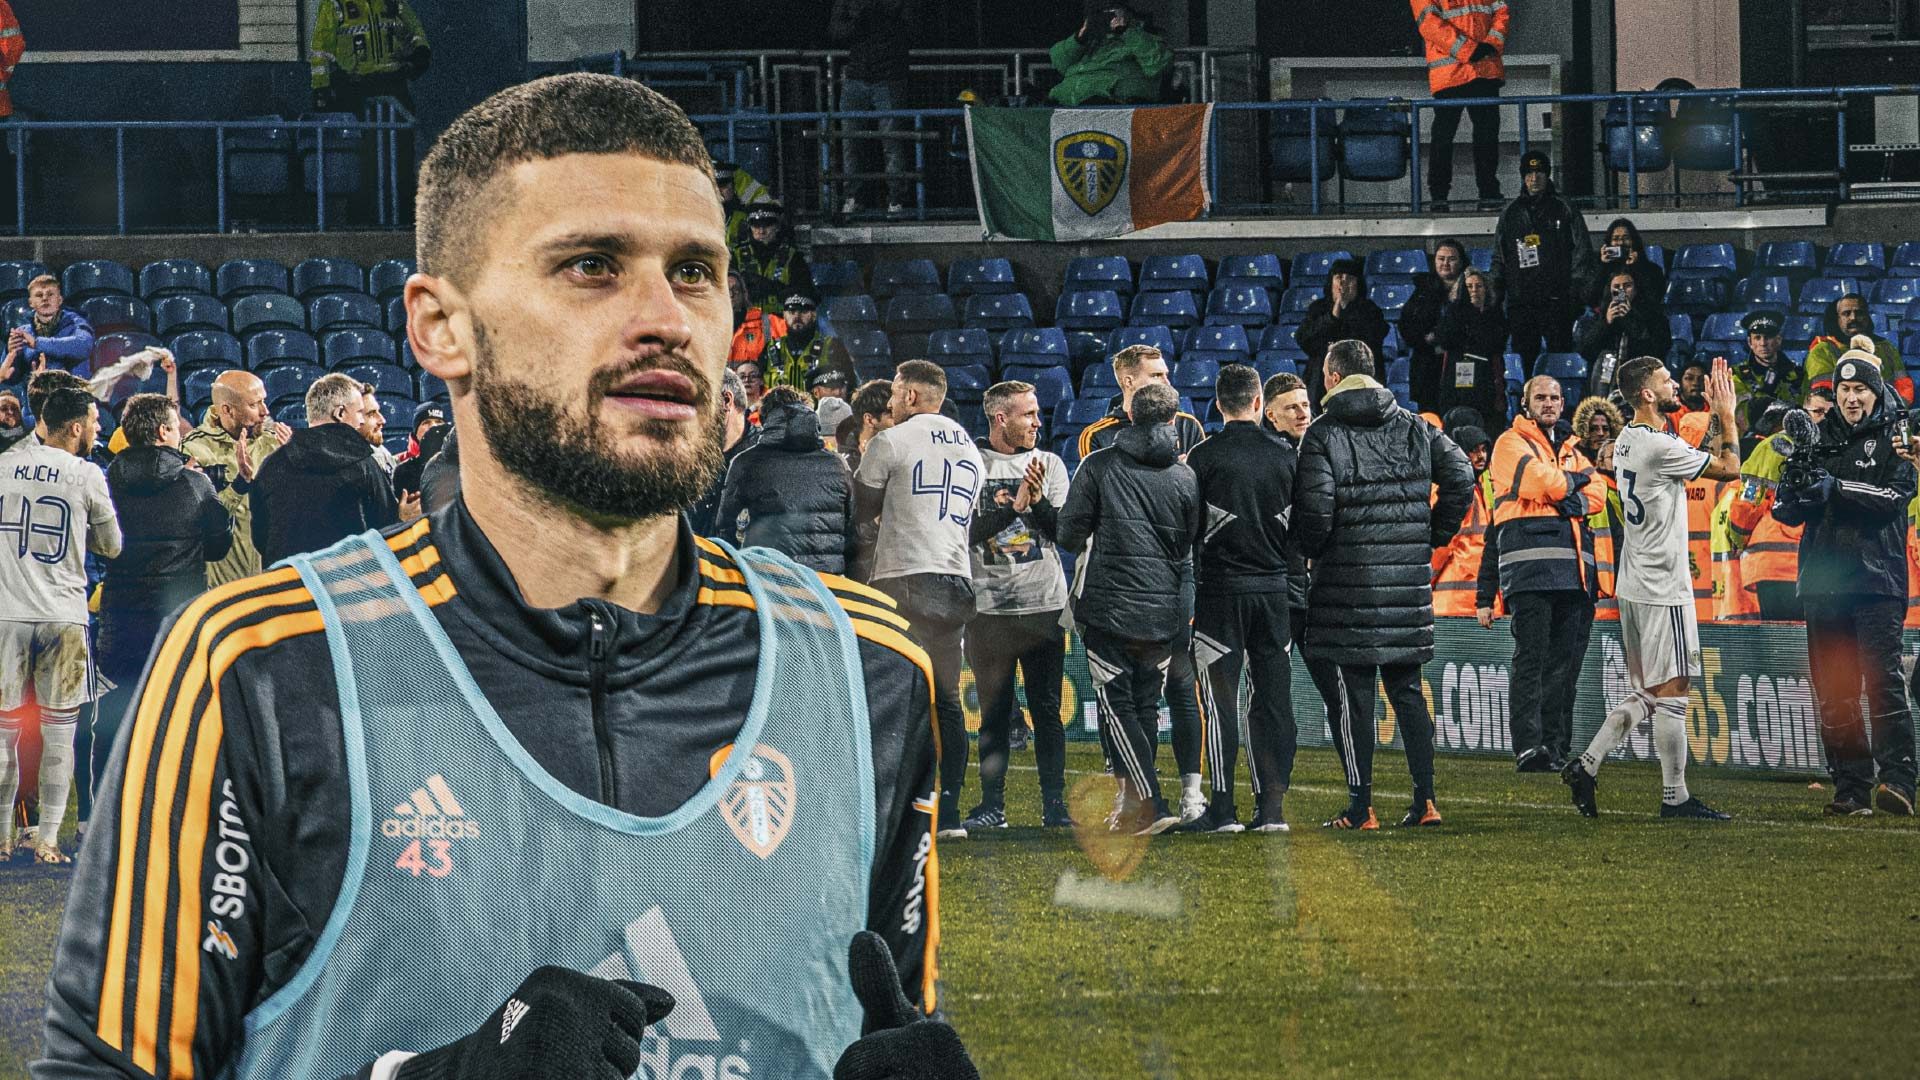 Mateusz Klich in a training bib ahead of his final appearance, and getting a guard of honour as he leaves Elland Road